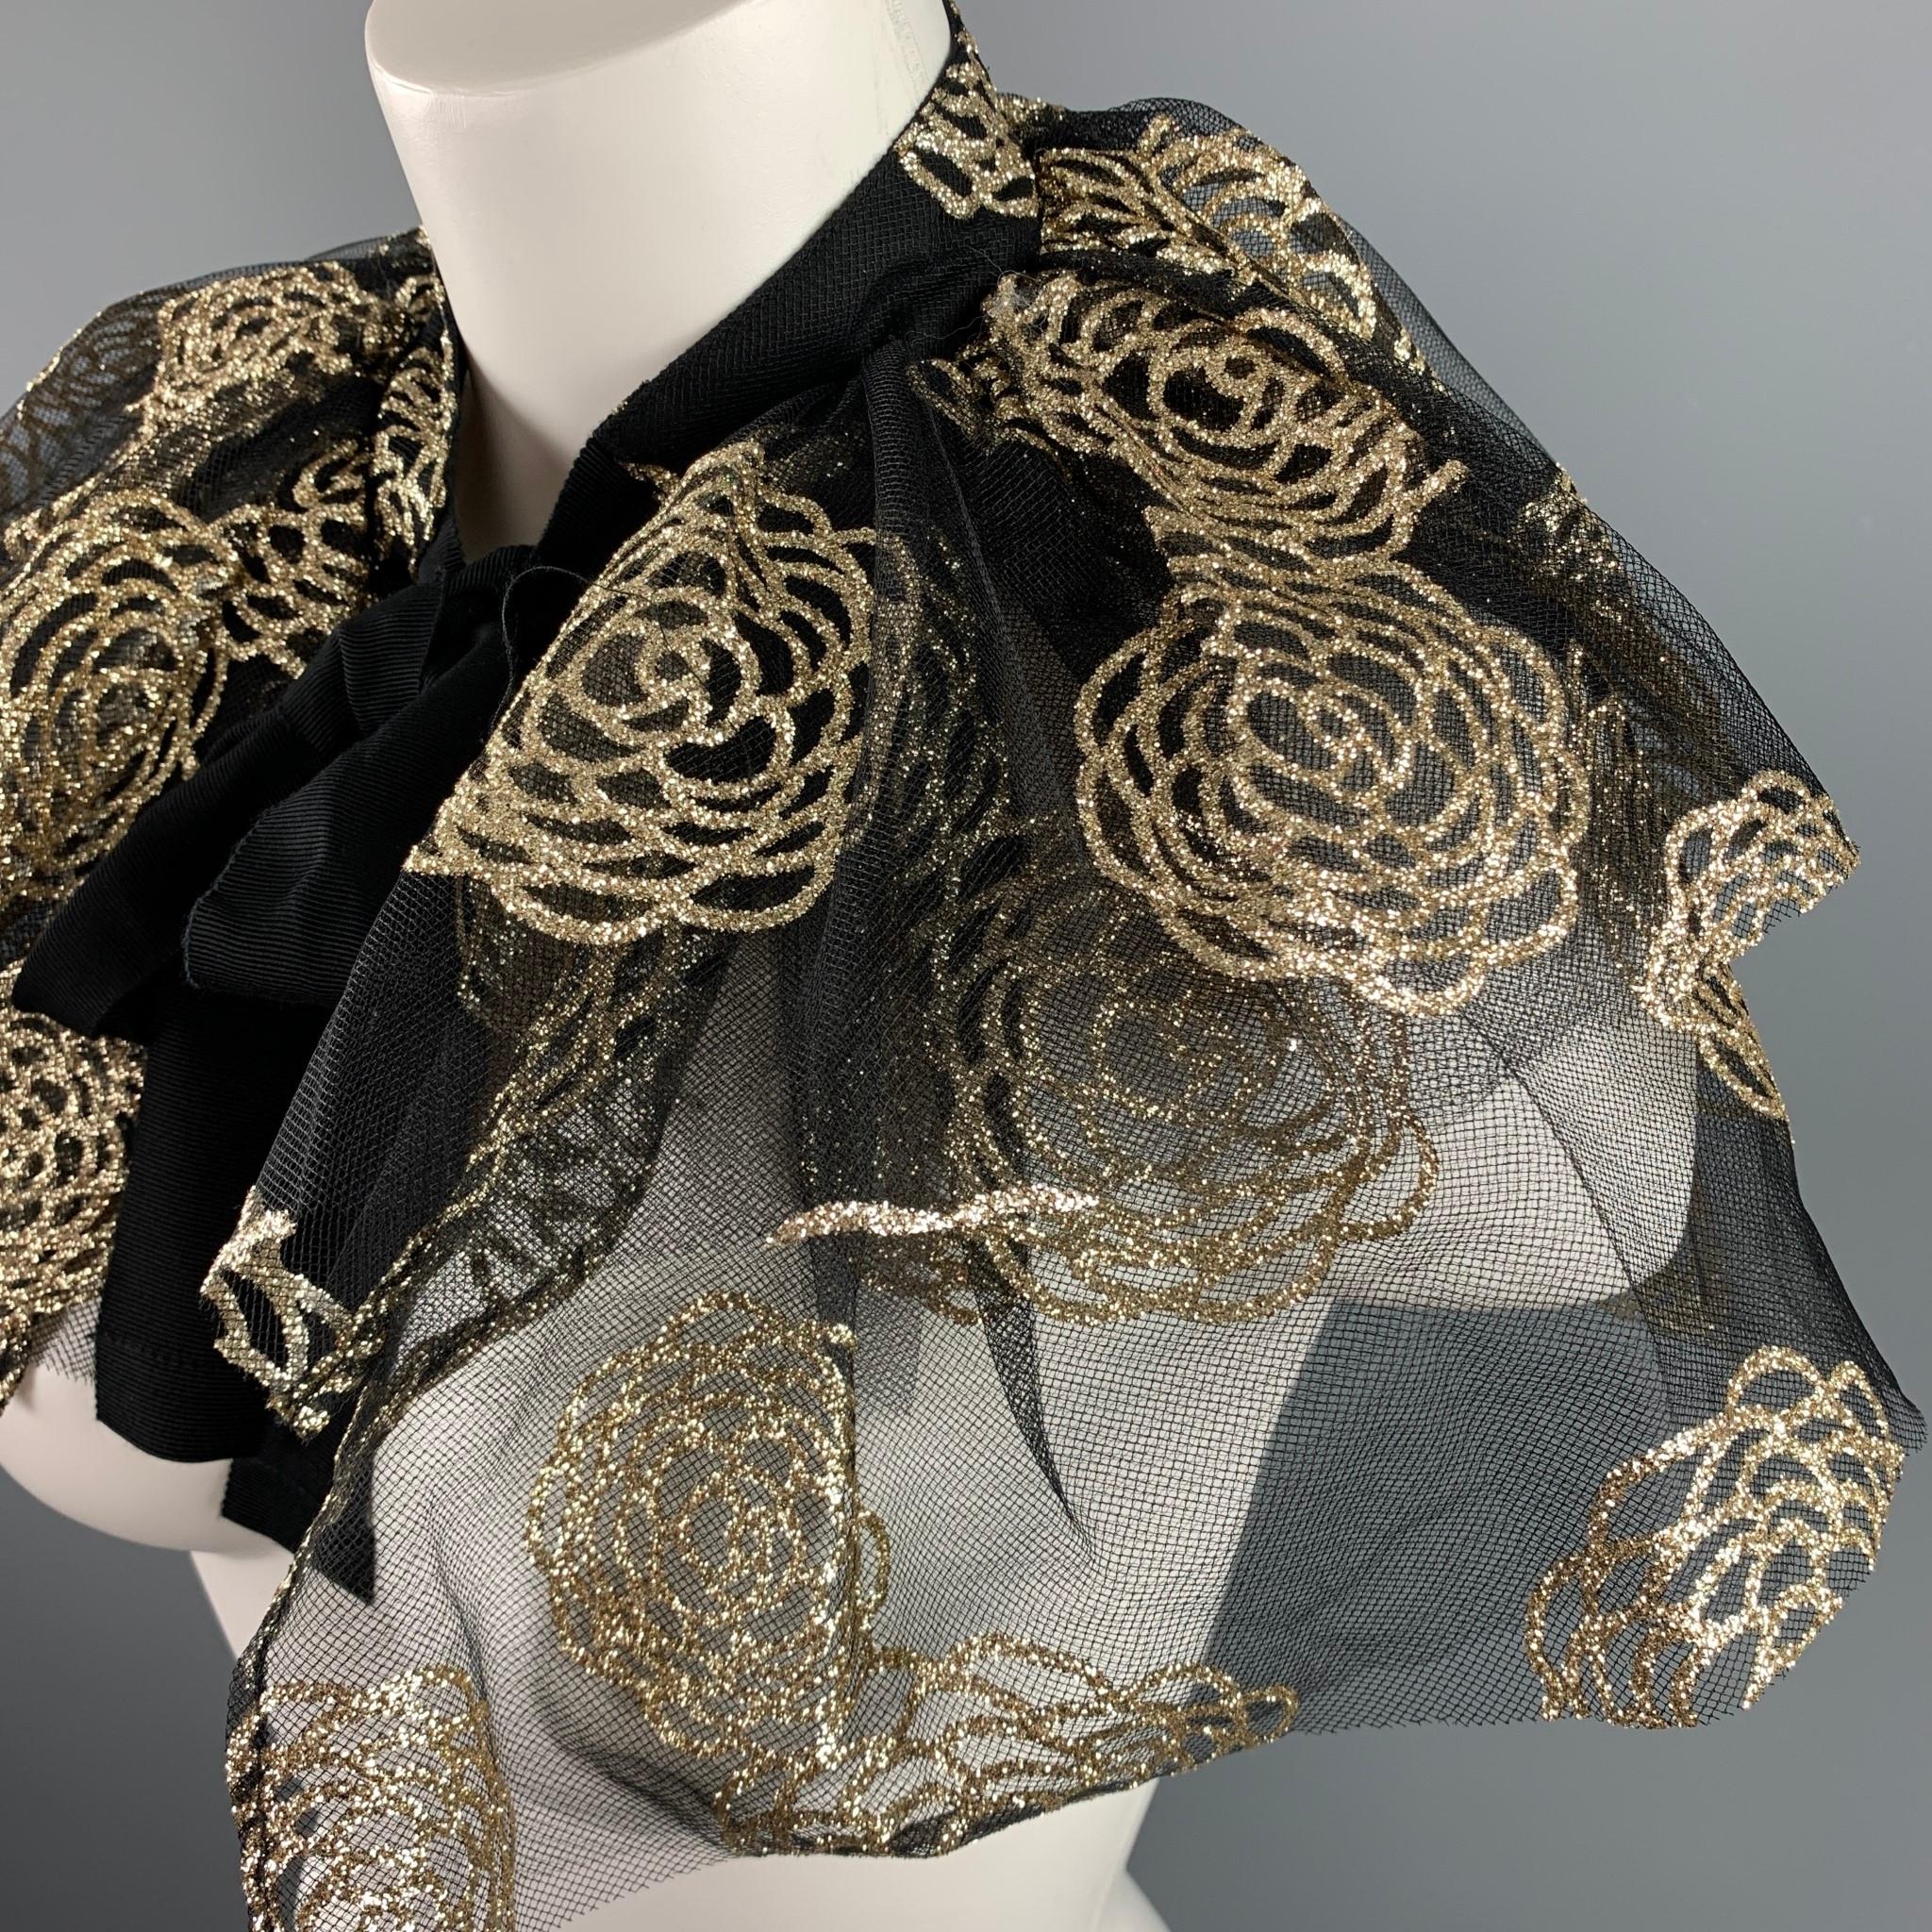 CO collar comes in a black & gold metallic floral tule featuring a ribbon tie closure. 

Excellent Pre-Owned Condition.
Marked: One Size